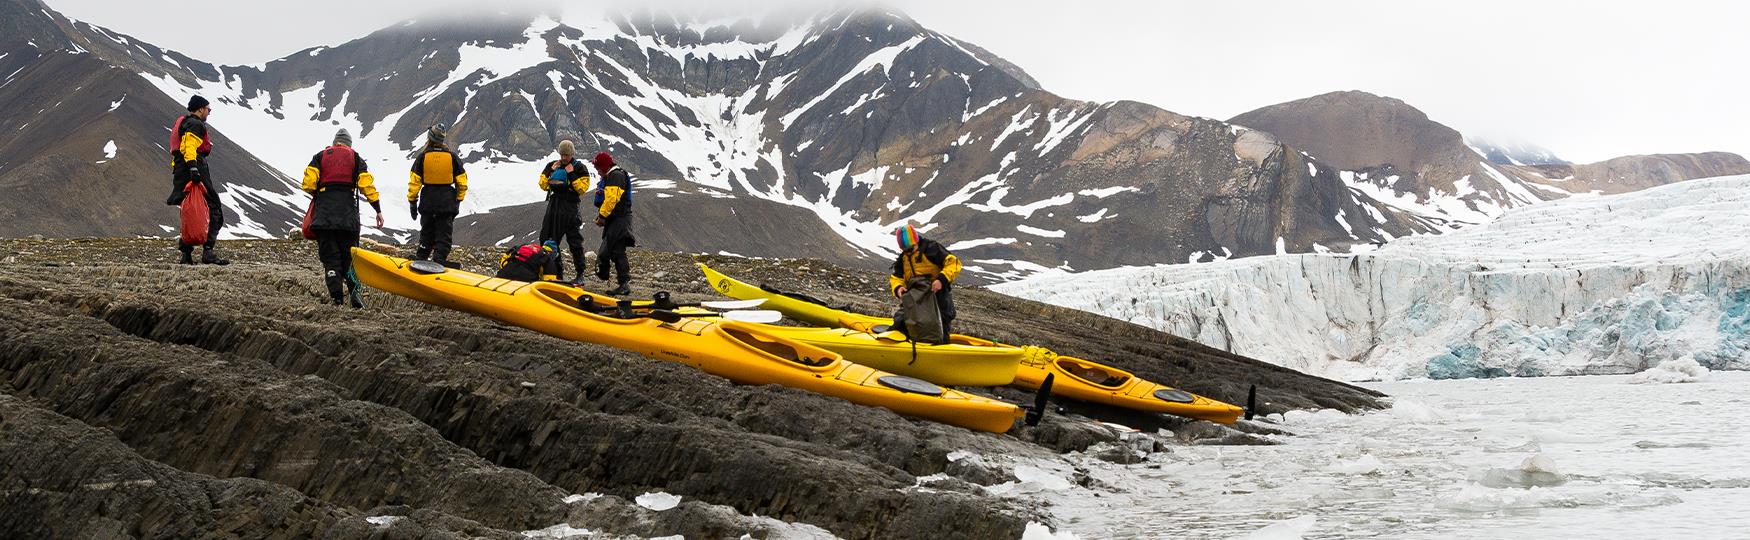 A group of guests and a guide in kayaking equipment next to several kayaks on the shore of a fjord. In the background there's a large mountain and a glacier.